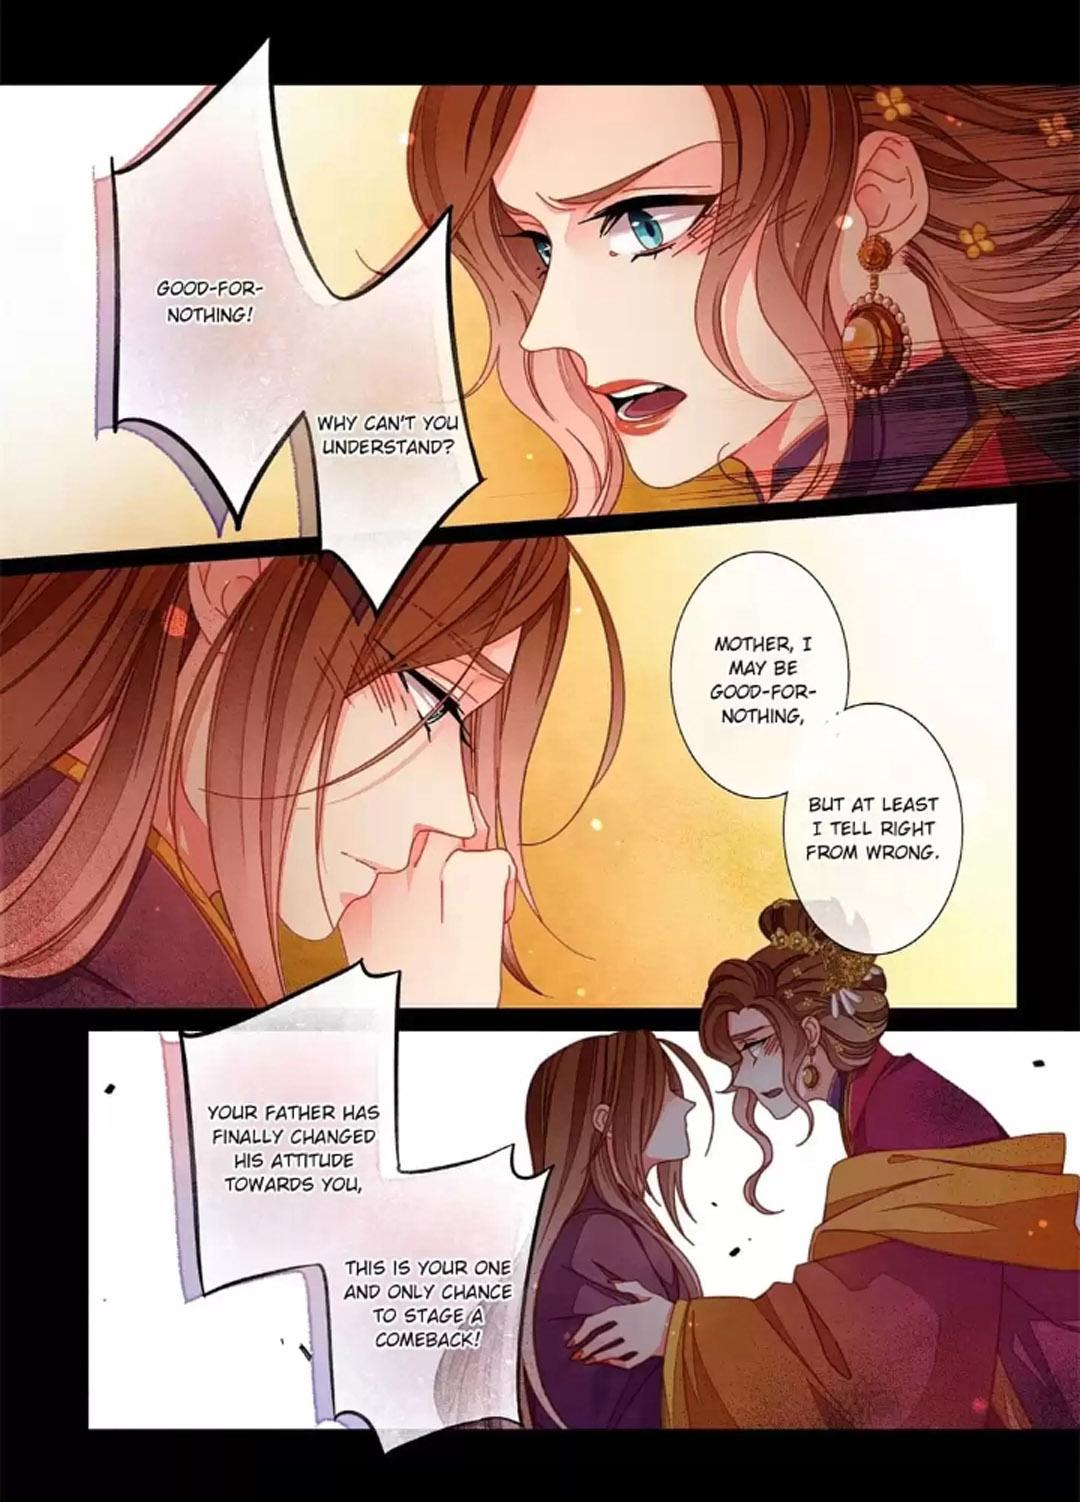 The Crown Prince - Page 2